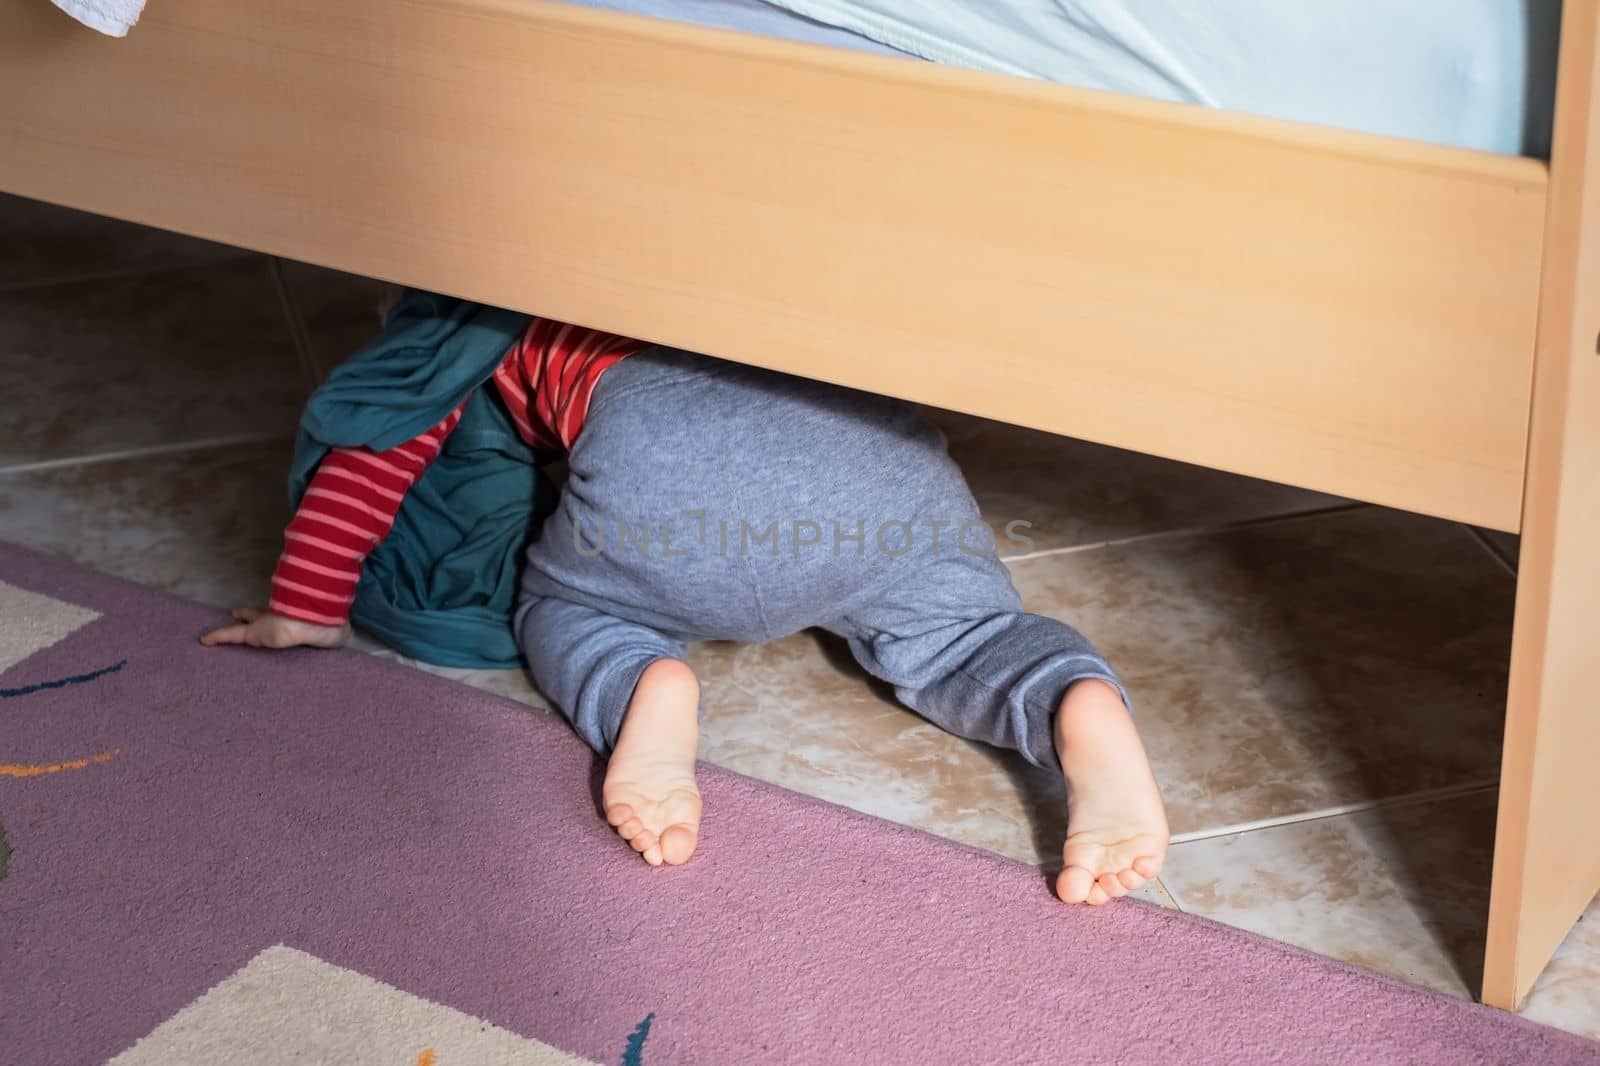 View on the bed on cute baby crawling on floor at bedroom. 